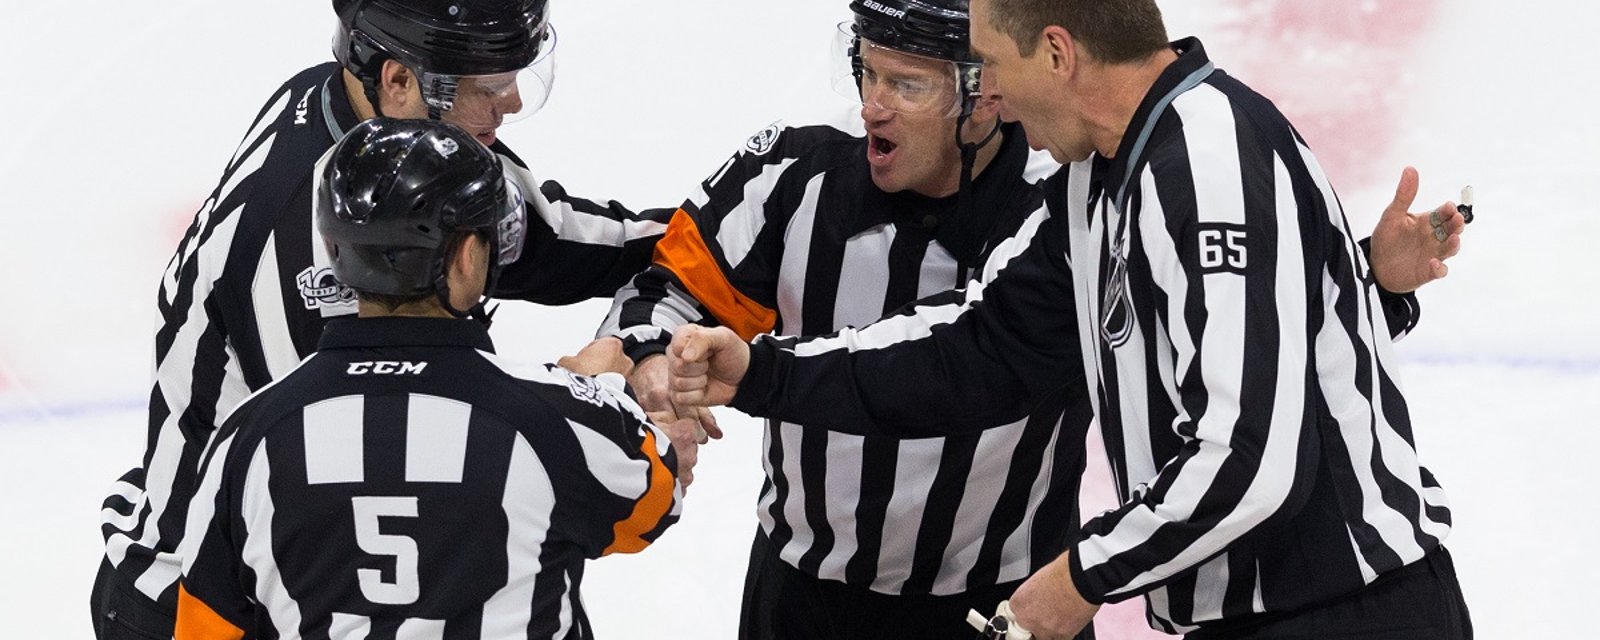 Breaking: NHL admits officials screwed up review, may have cost a team the game.